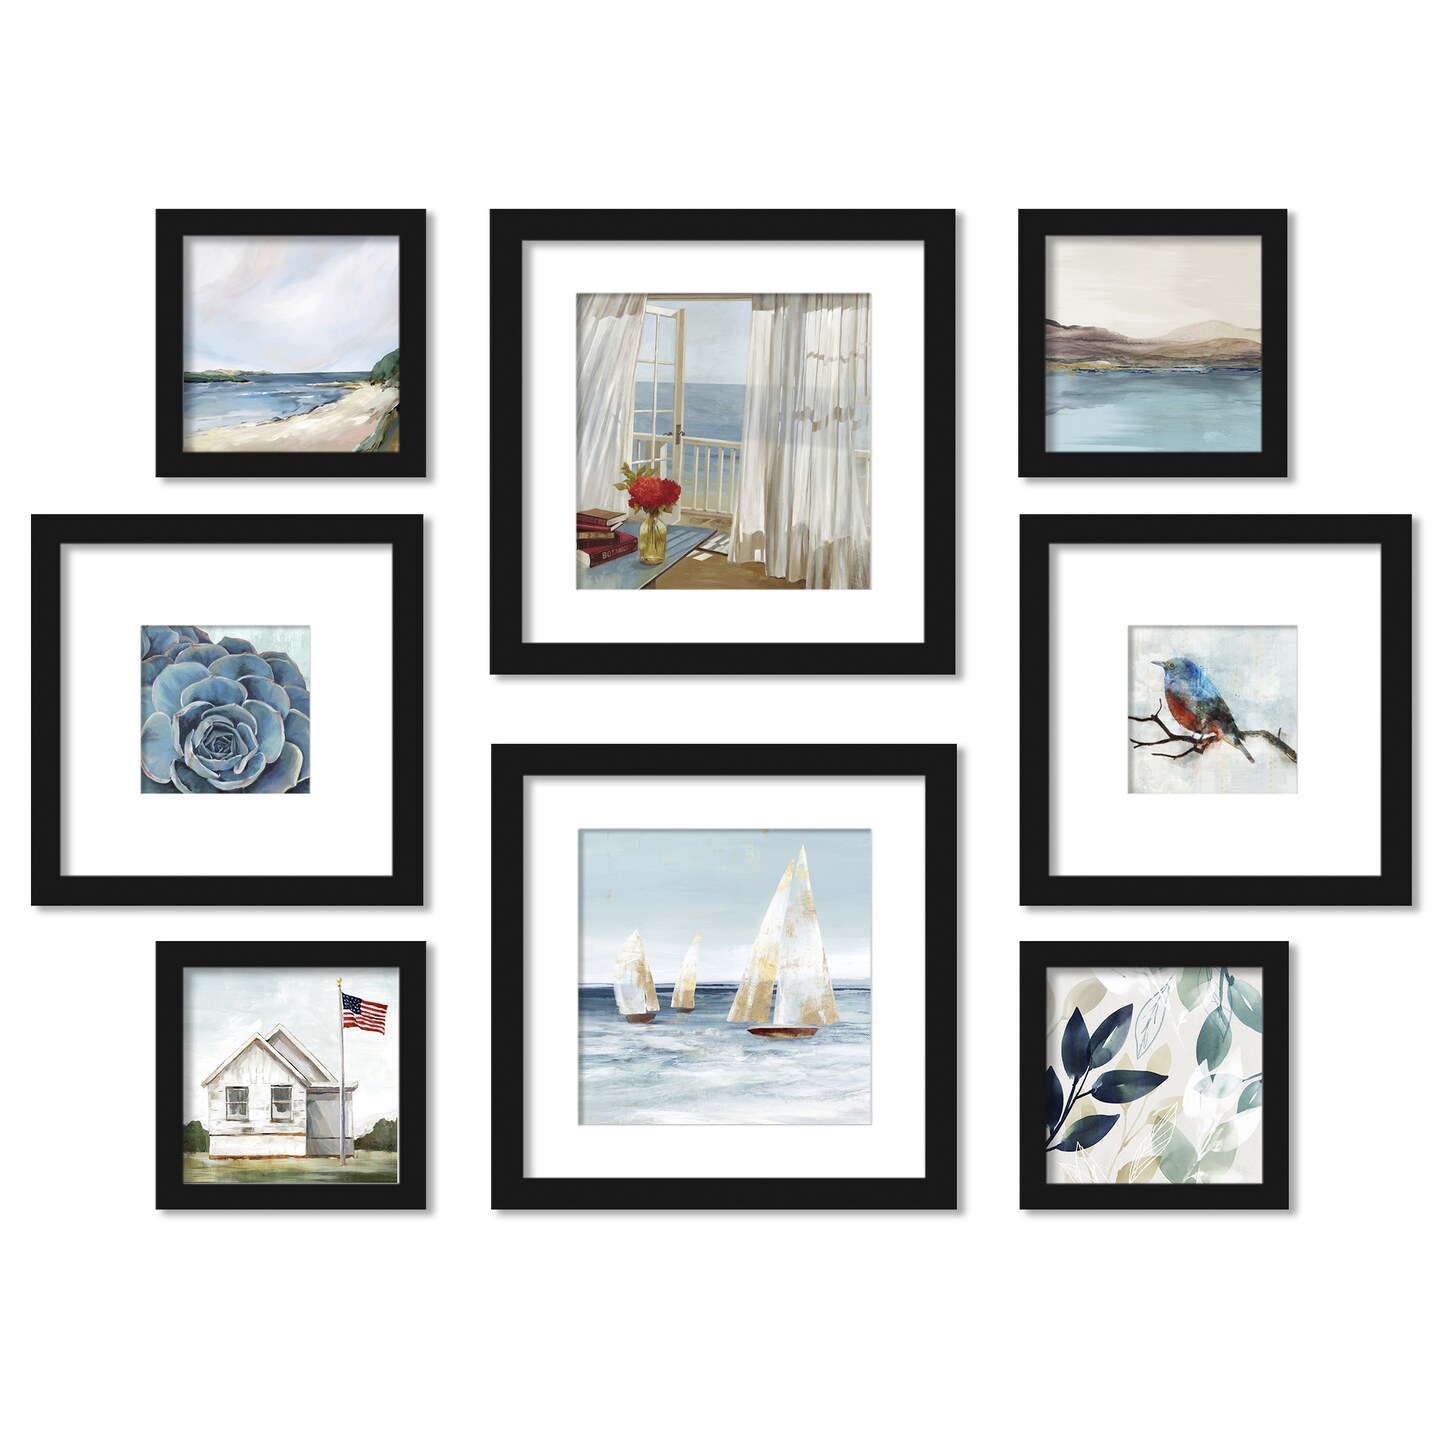 Americanflat Out to Sea 8 Piece Framed Gallery Wall Art Set